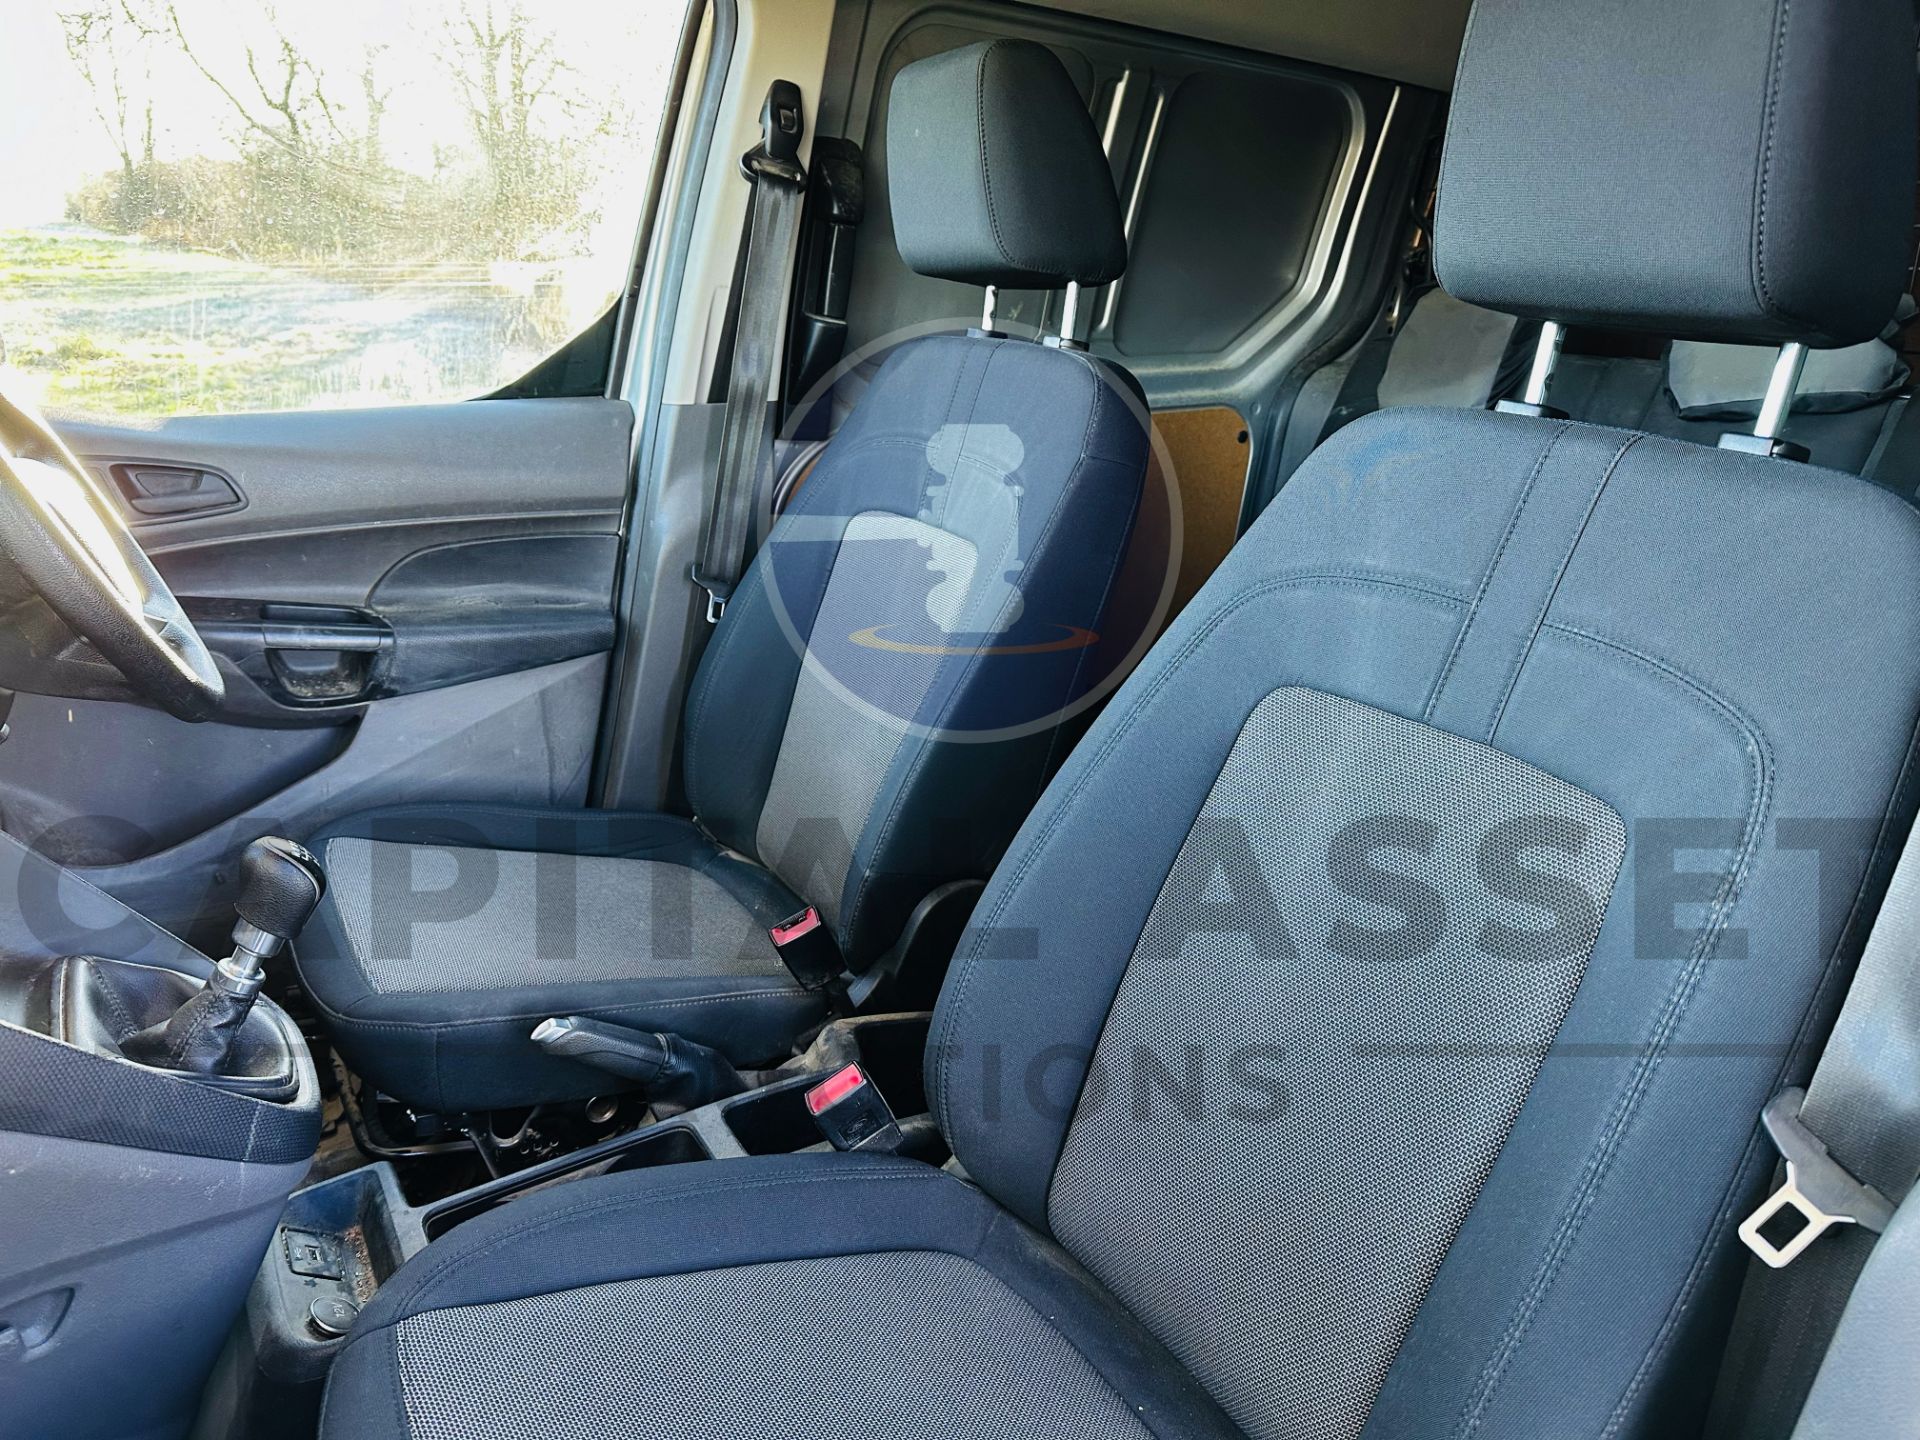 (ON SALE) FORD TRANSIT CONNECT 1.5 Tdci LWB 5 SEAT CREW VAN "EURO 6" - AIR CON - SILVER - 19 REG - Image 15 of 29